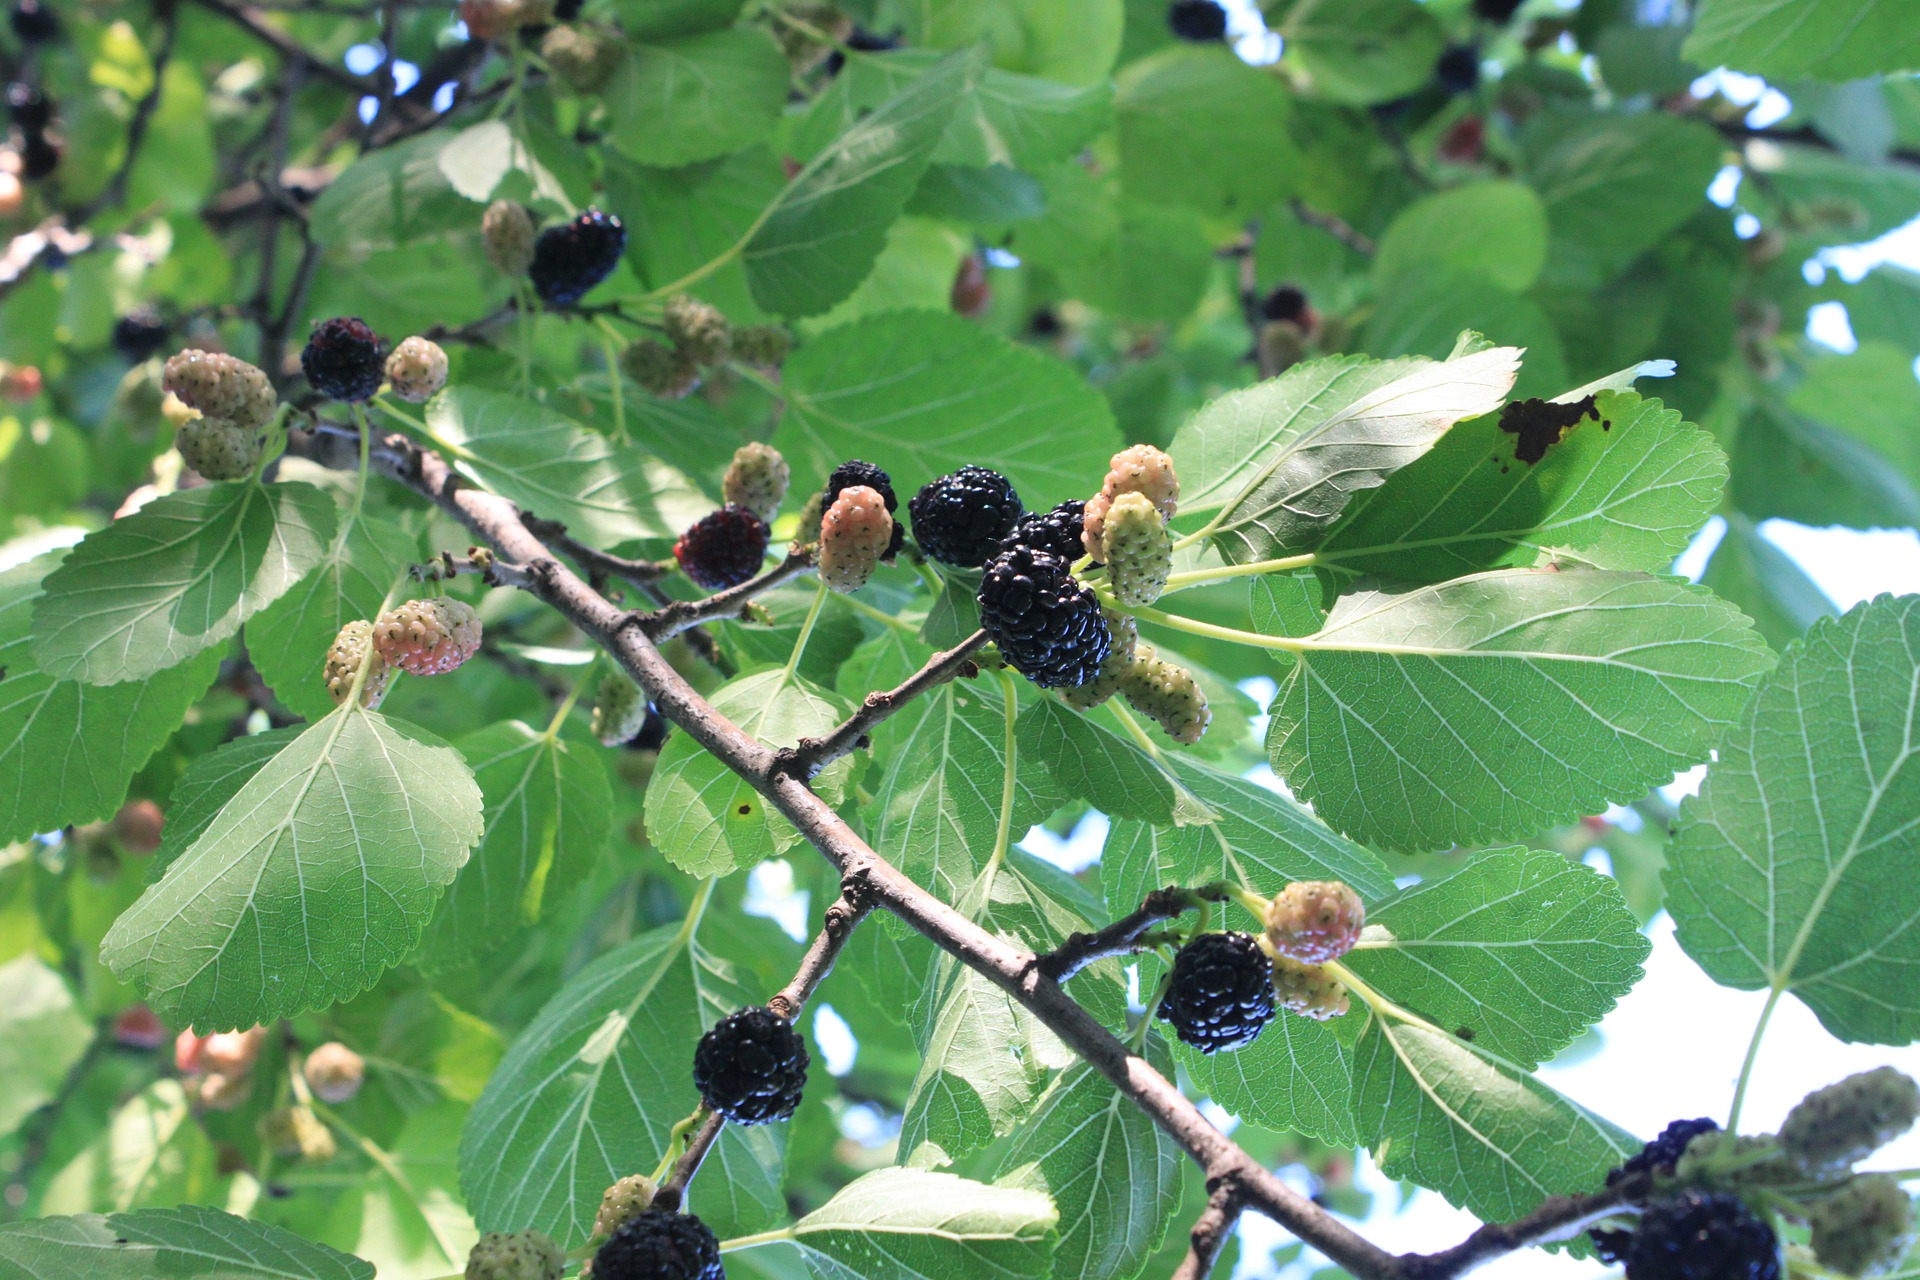 Mulberry branch, leaves, and berries